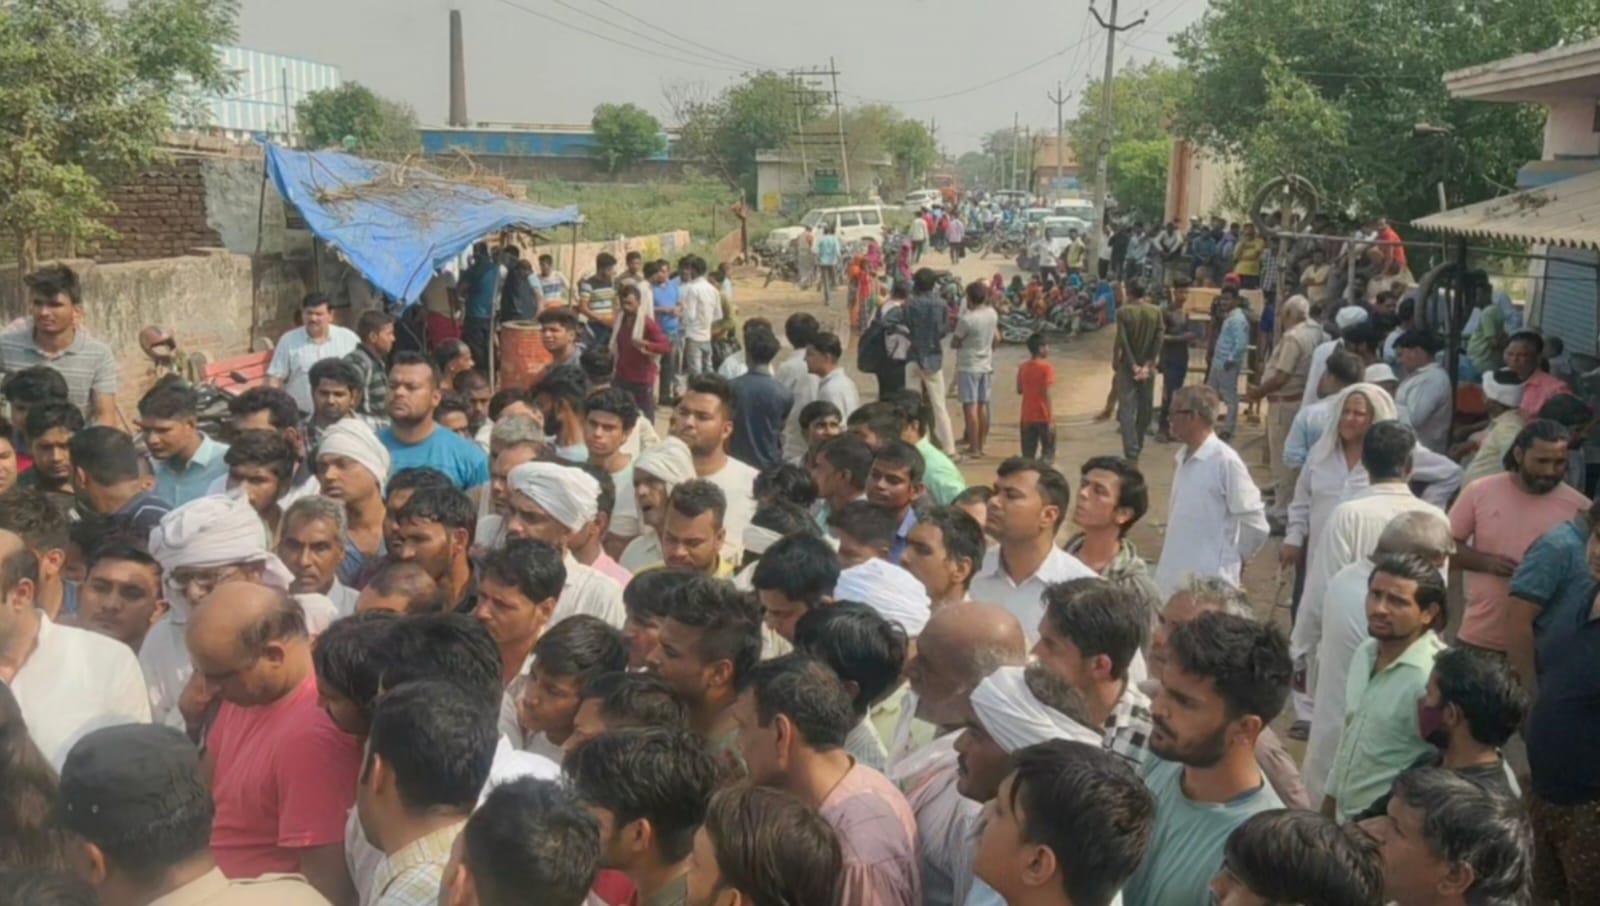 Palwal: Youth electrocuted, villagers block traffic : The Tribune India